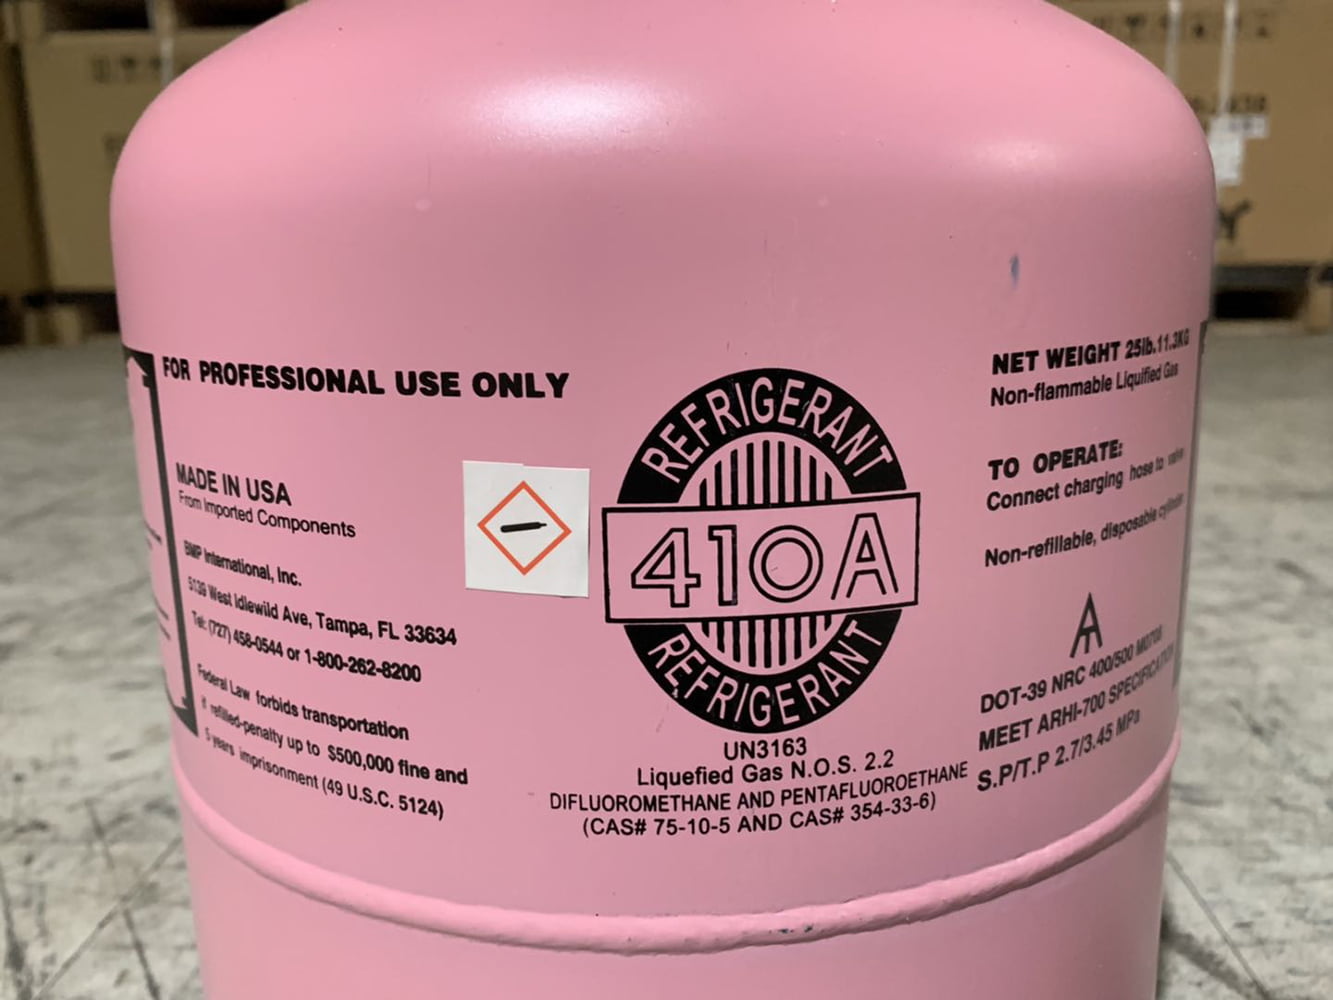 R410a Refrigerant FACTORY SEALED FREE SAME DAY SHIPPING by 3pm R410a 25 lb 